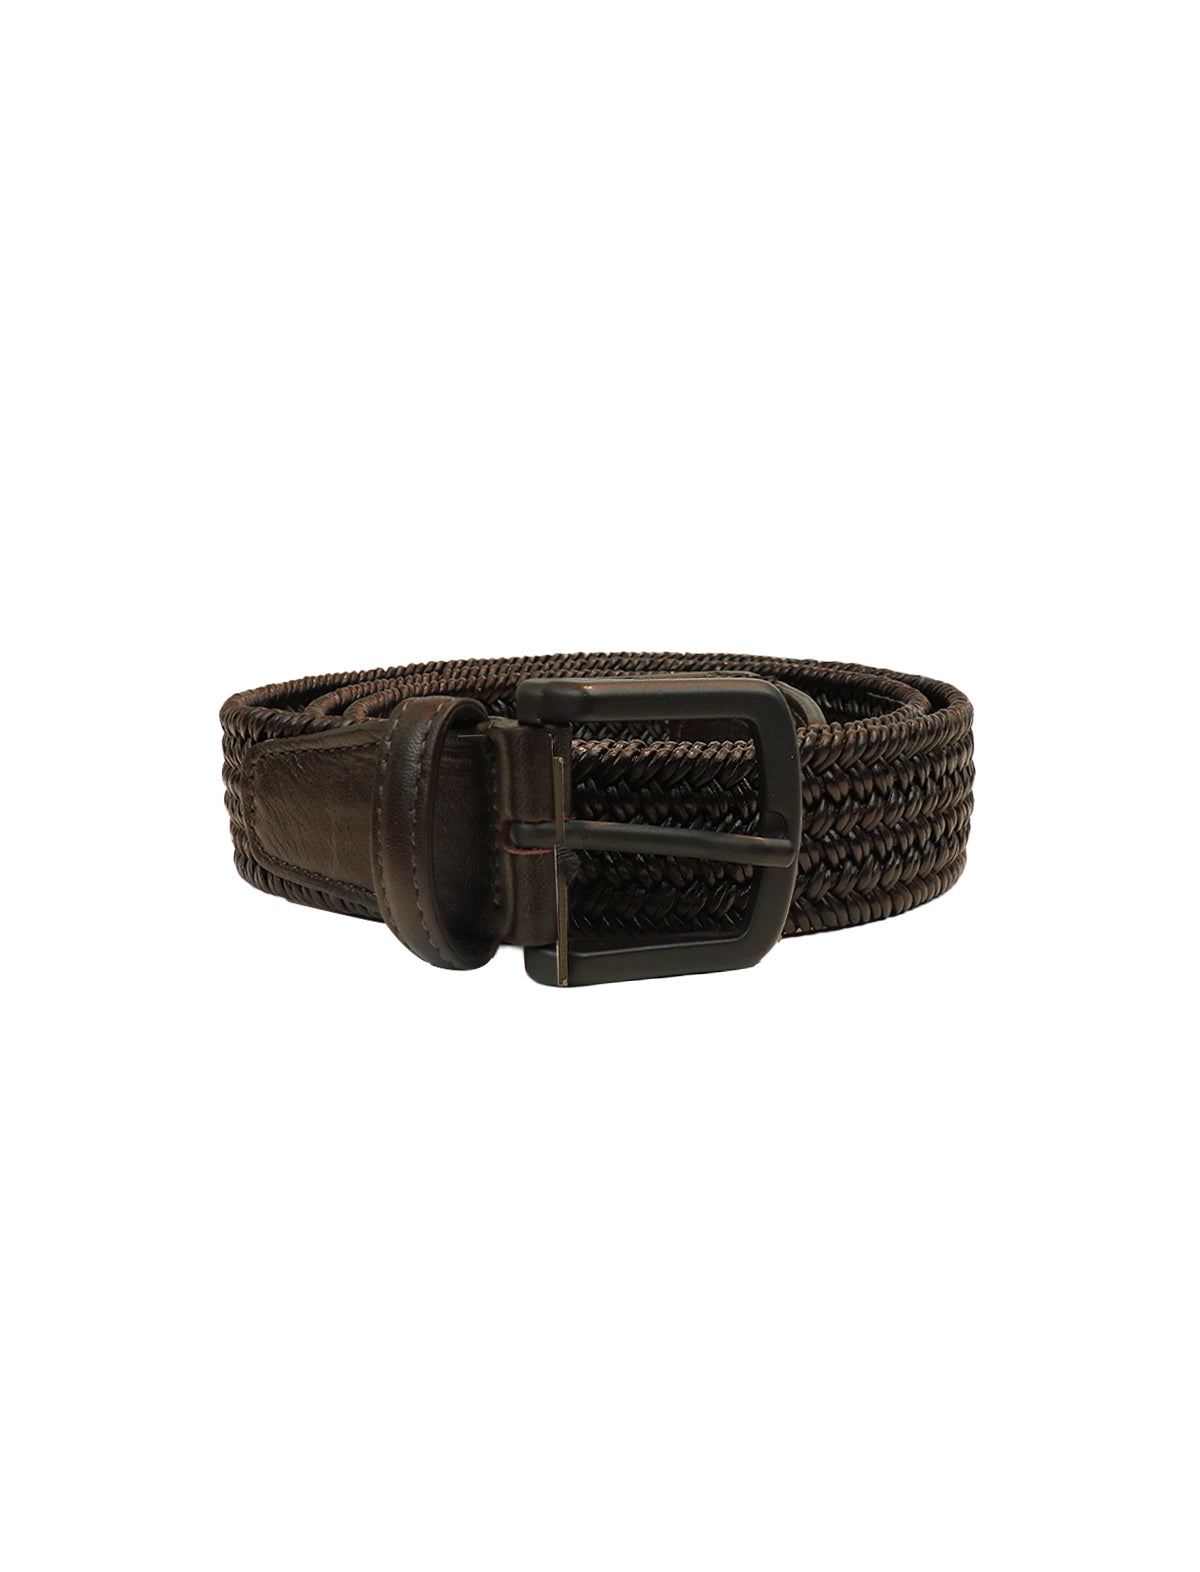 Andrea d'Amico Tonal Braided Leather Belt in Brown